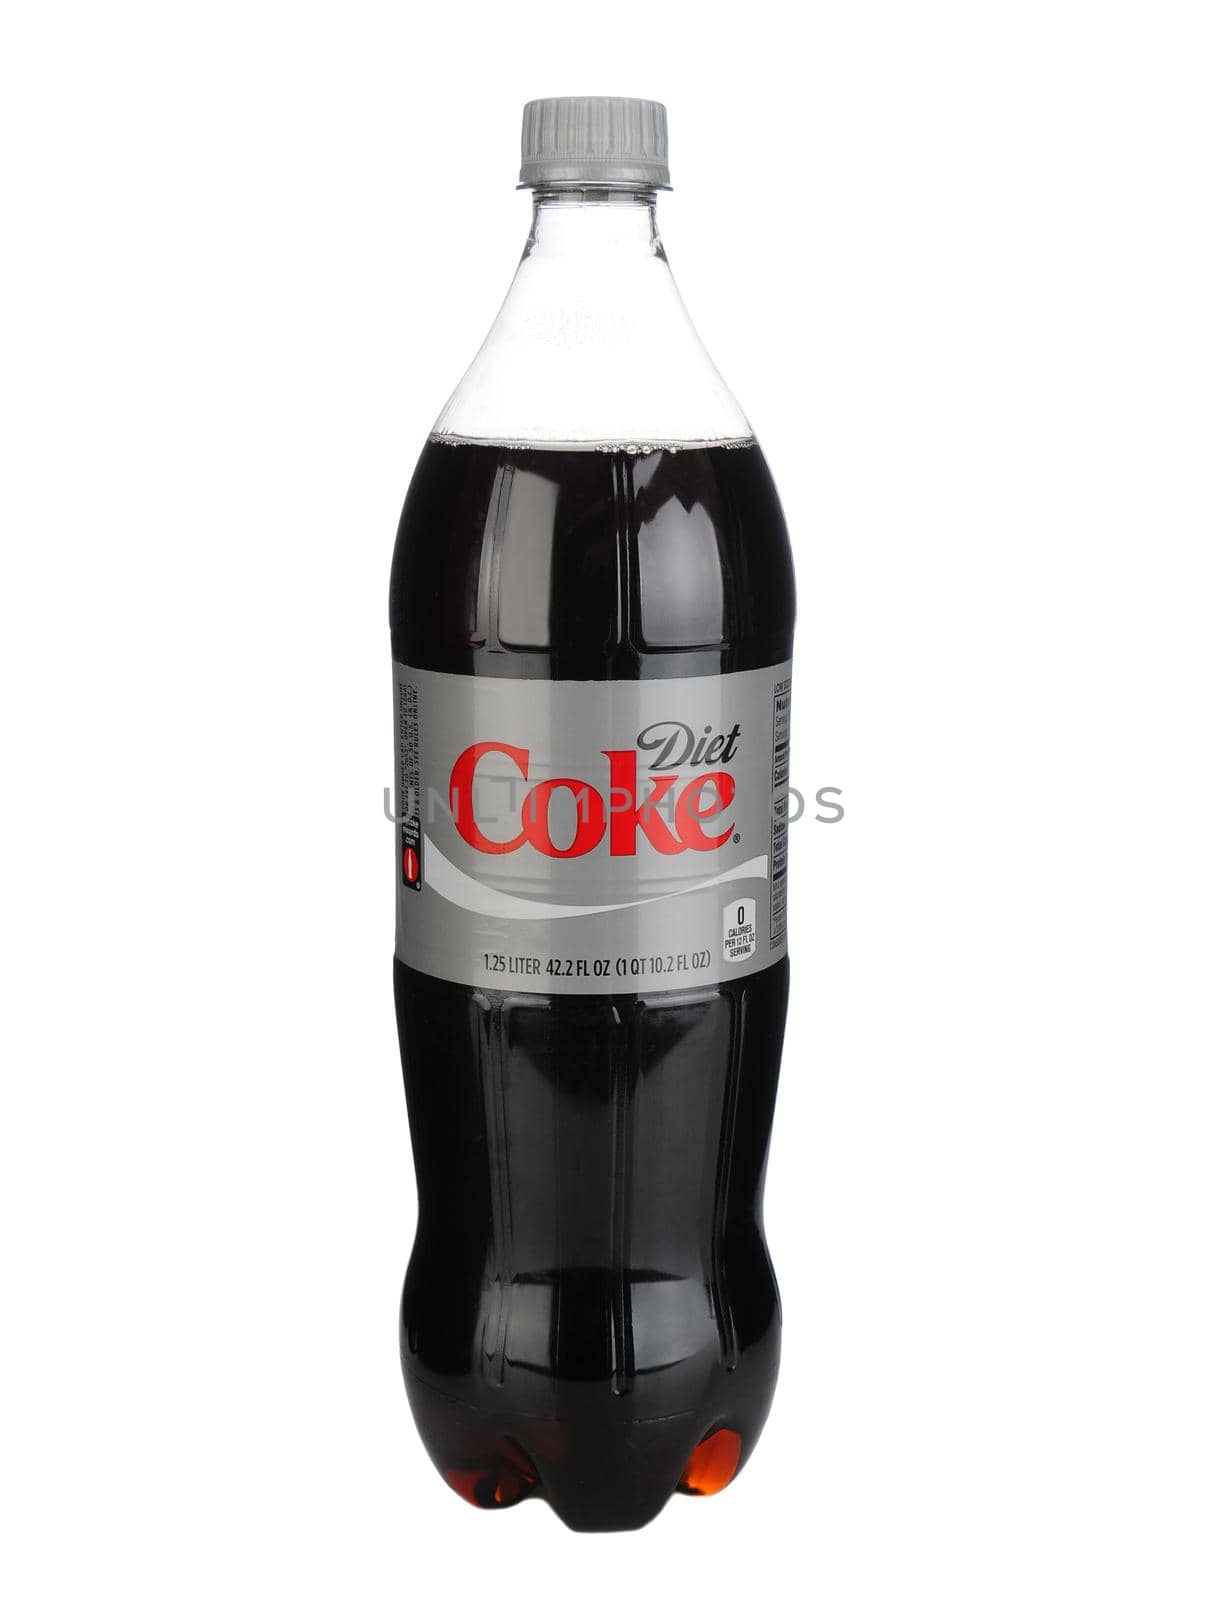 IRVINE, CA - January 11, 2013: A 1.25 Liter bottle of Diet Coke. Introduced in the US on August 9, 1982, it was the first new brand since 1886 to use the Coca-Cola trademark.